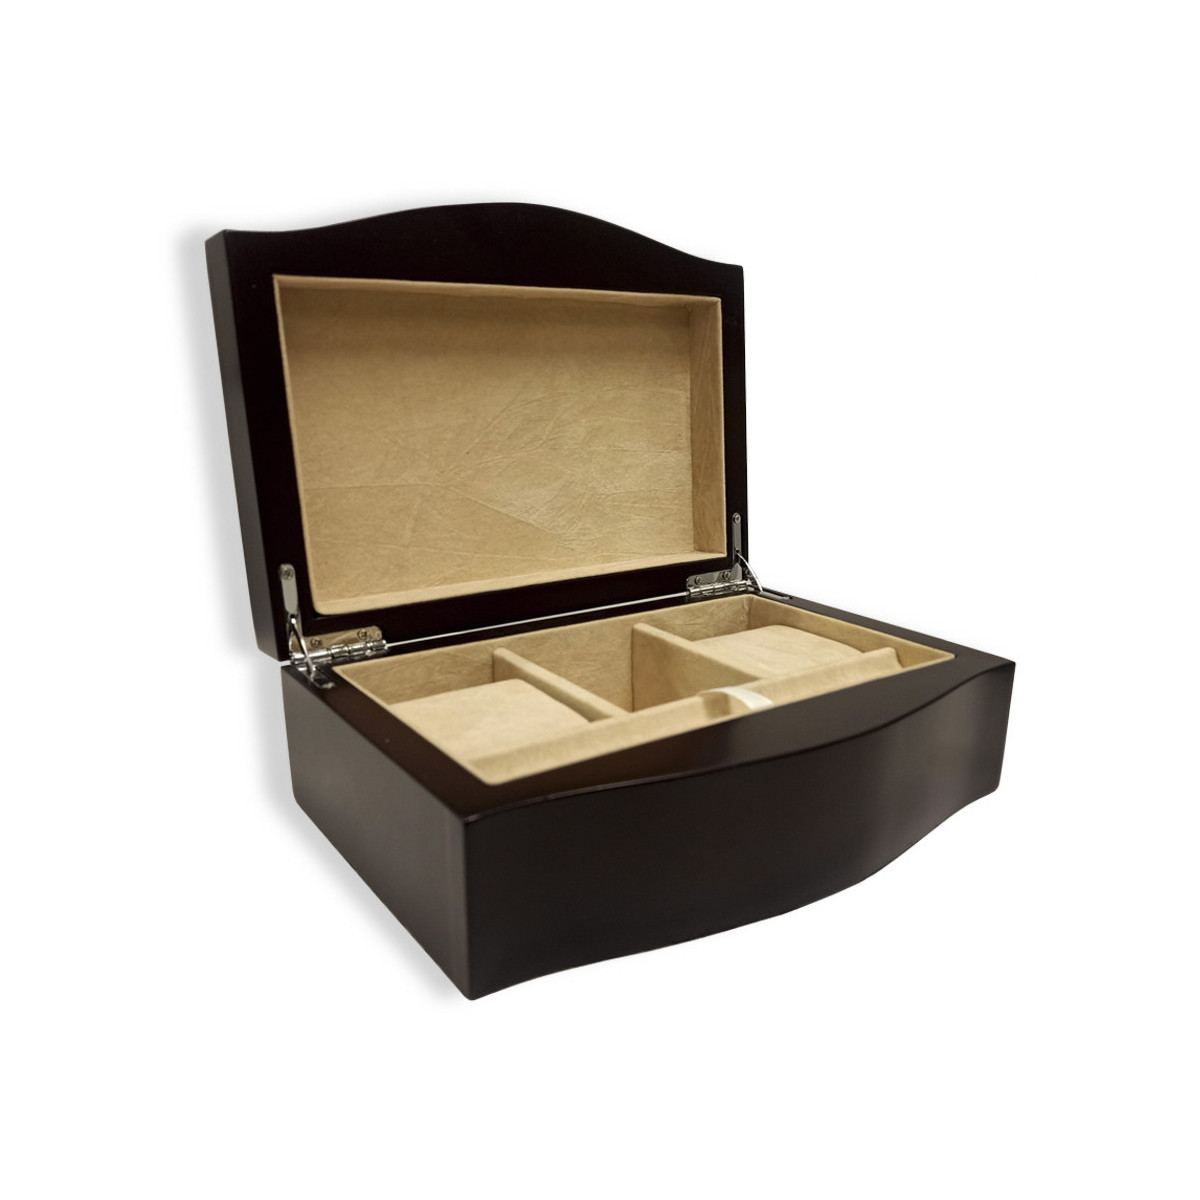 JEWELRY BOX FOR 2 WATCHES